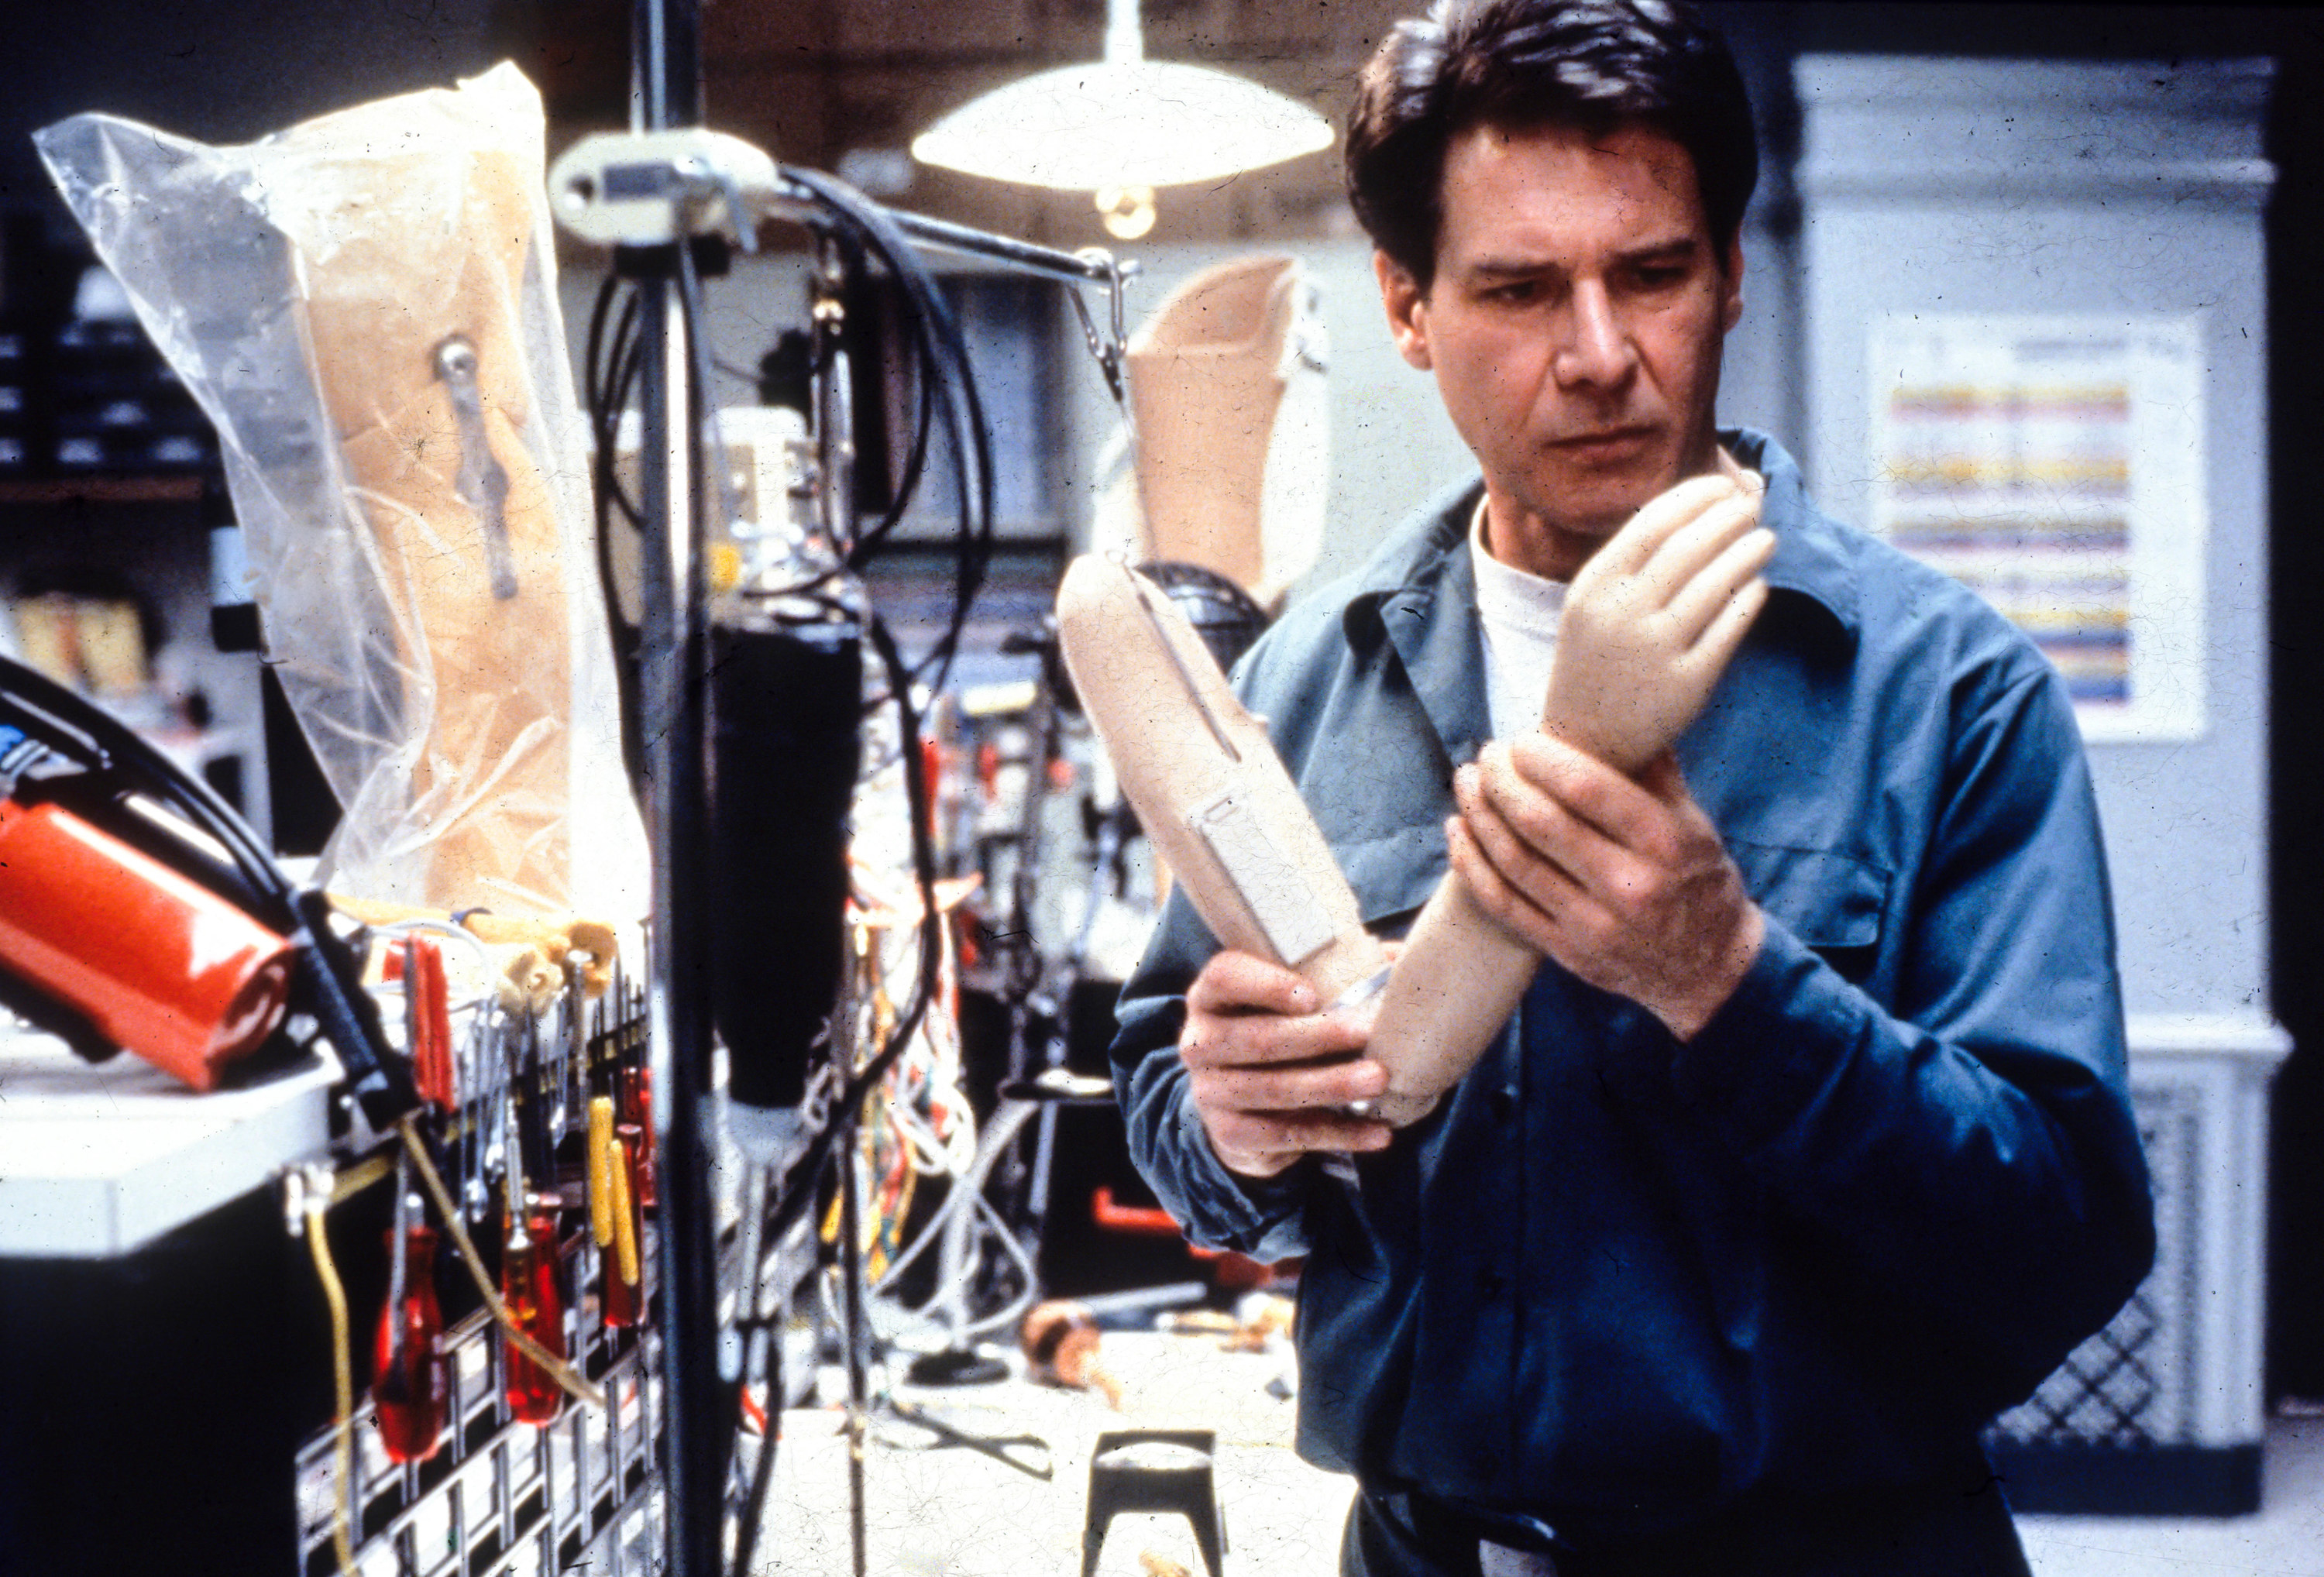 Harrison Ford examines a protesthetic arm in a laboratory